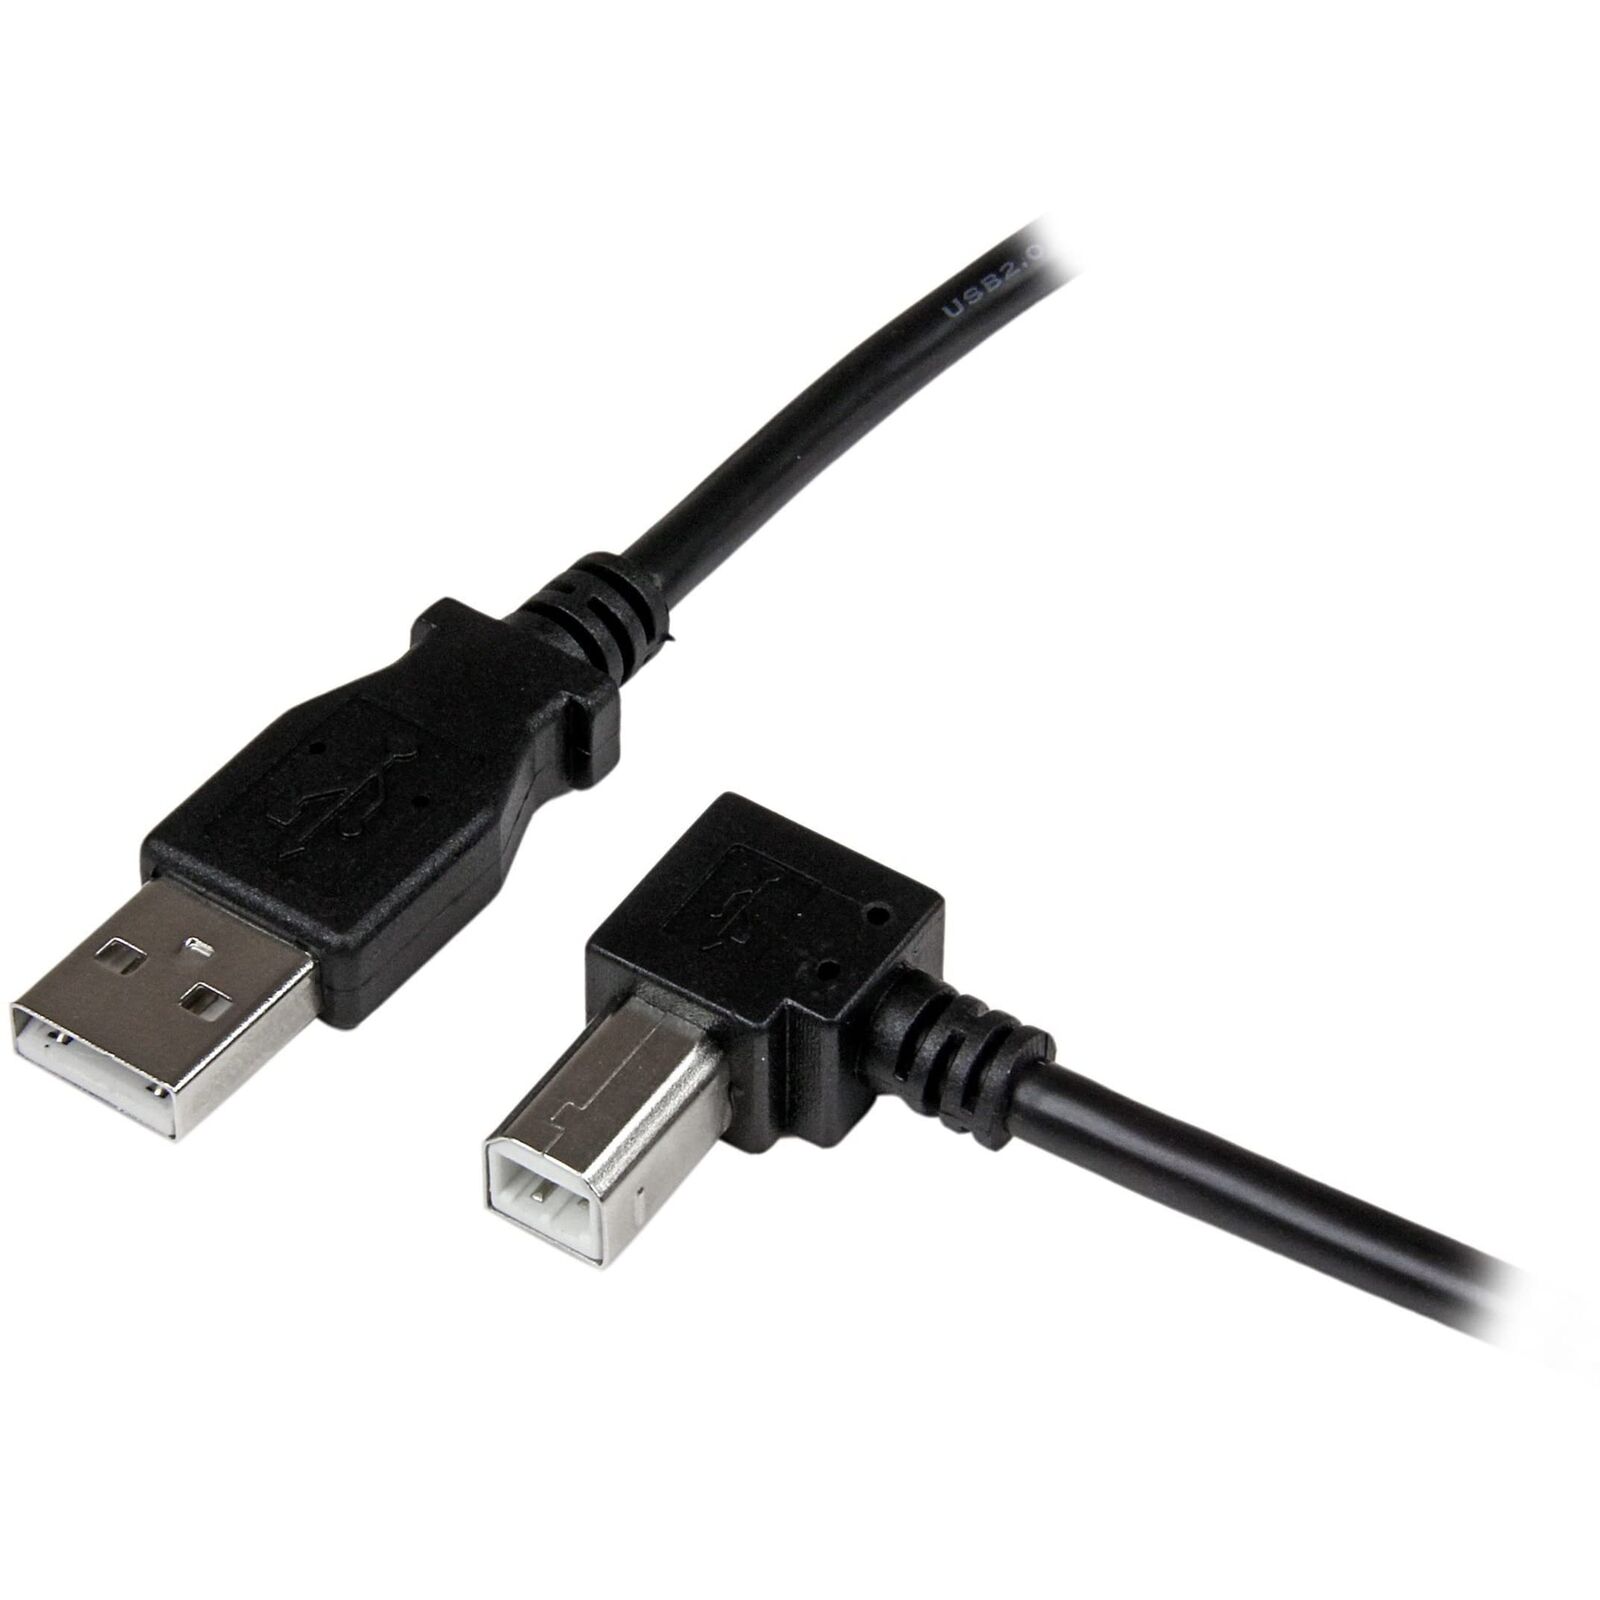 StarTech.com 3m USB 2.0 A to Right Angle B Cable Cord - 3 m USB Printer Cable - 